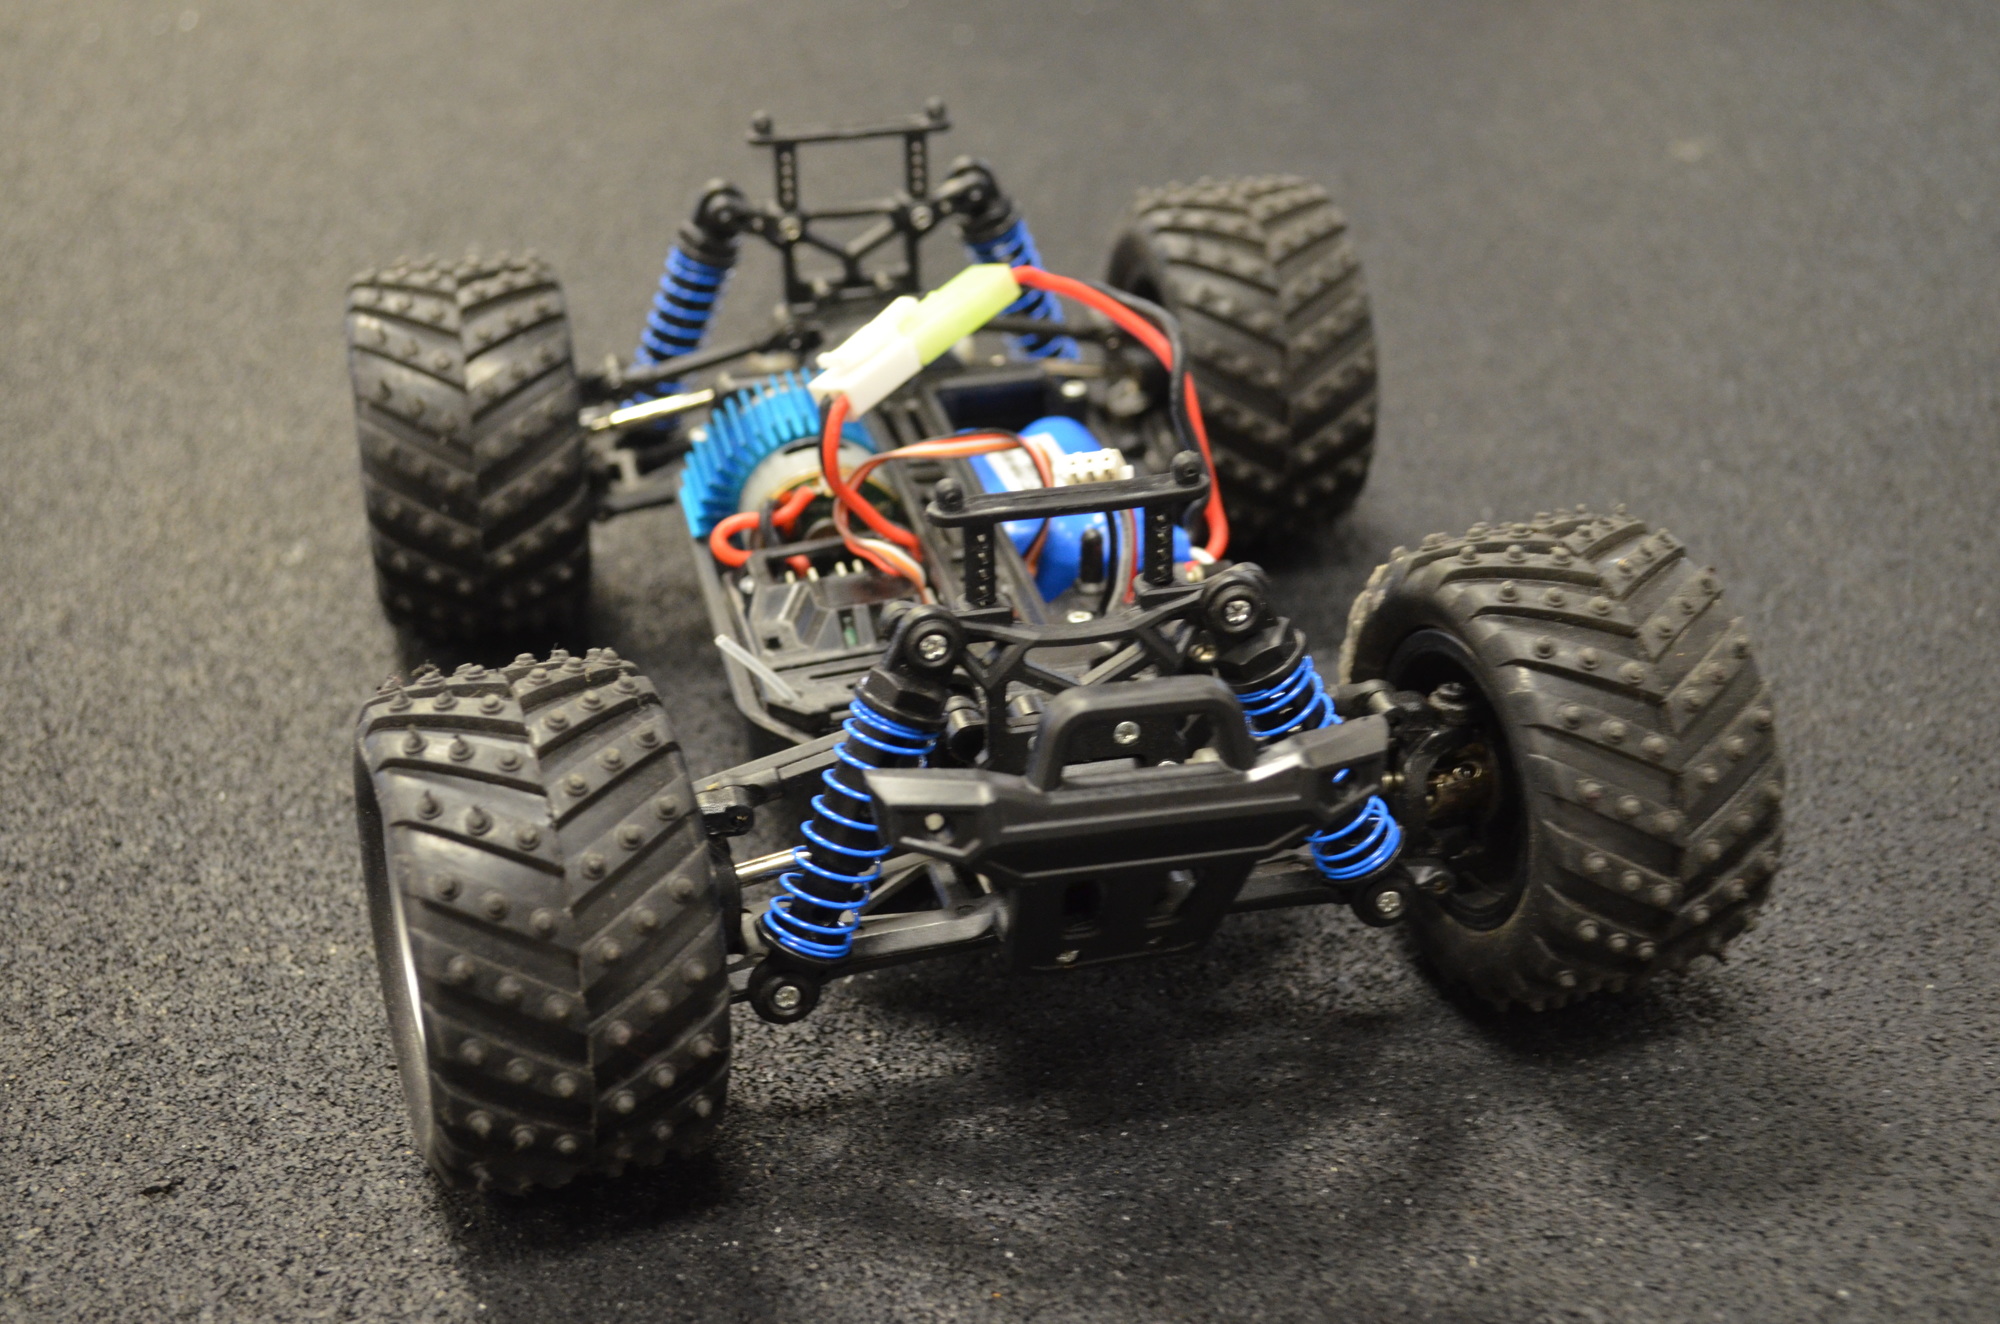 A look under the hood of the hobby-grade customizable remote control car.